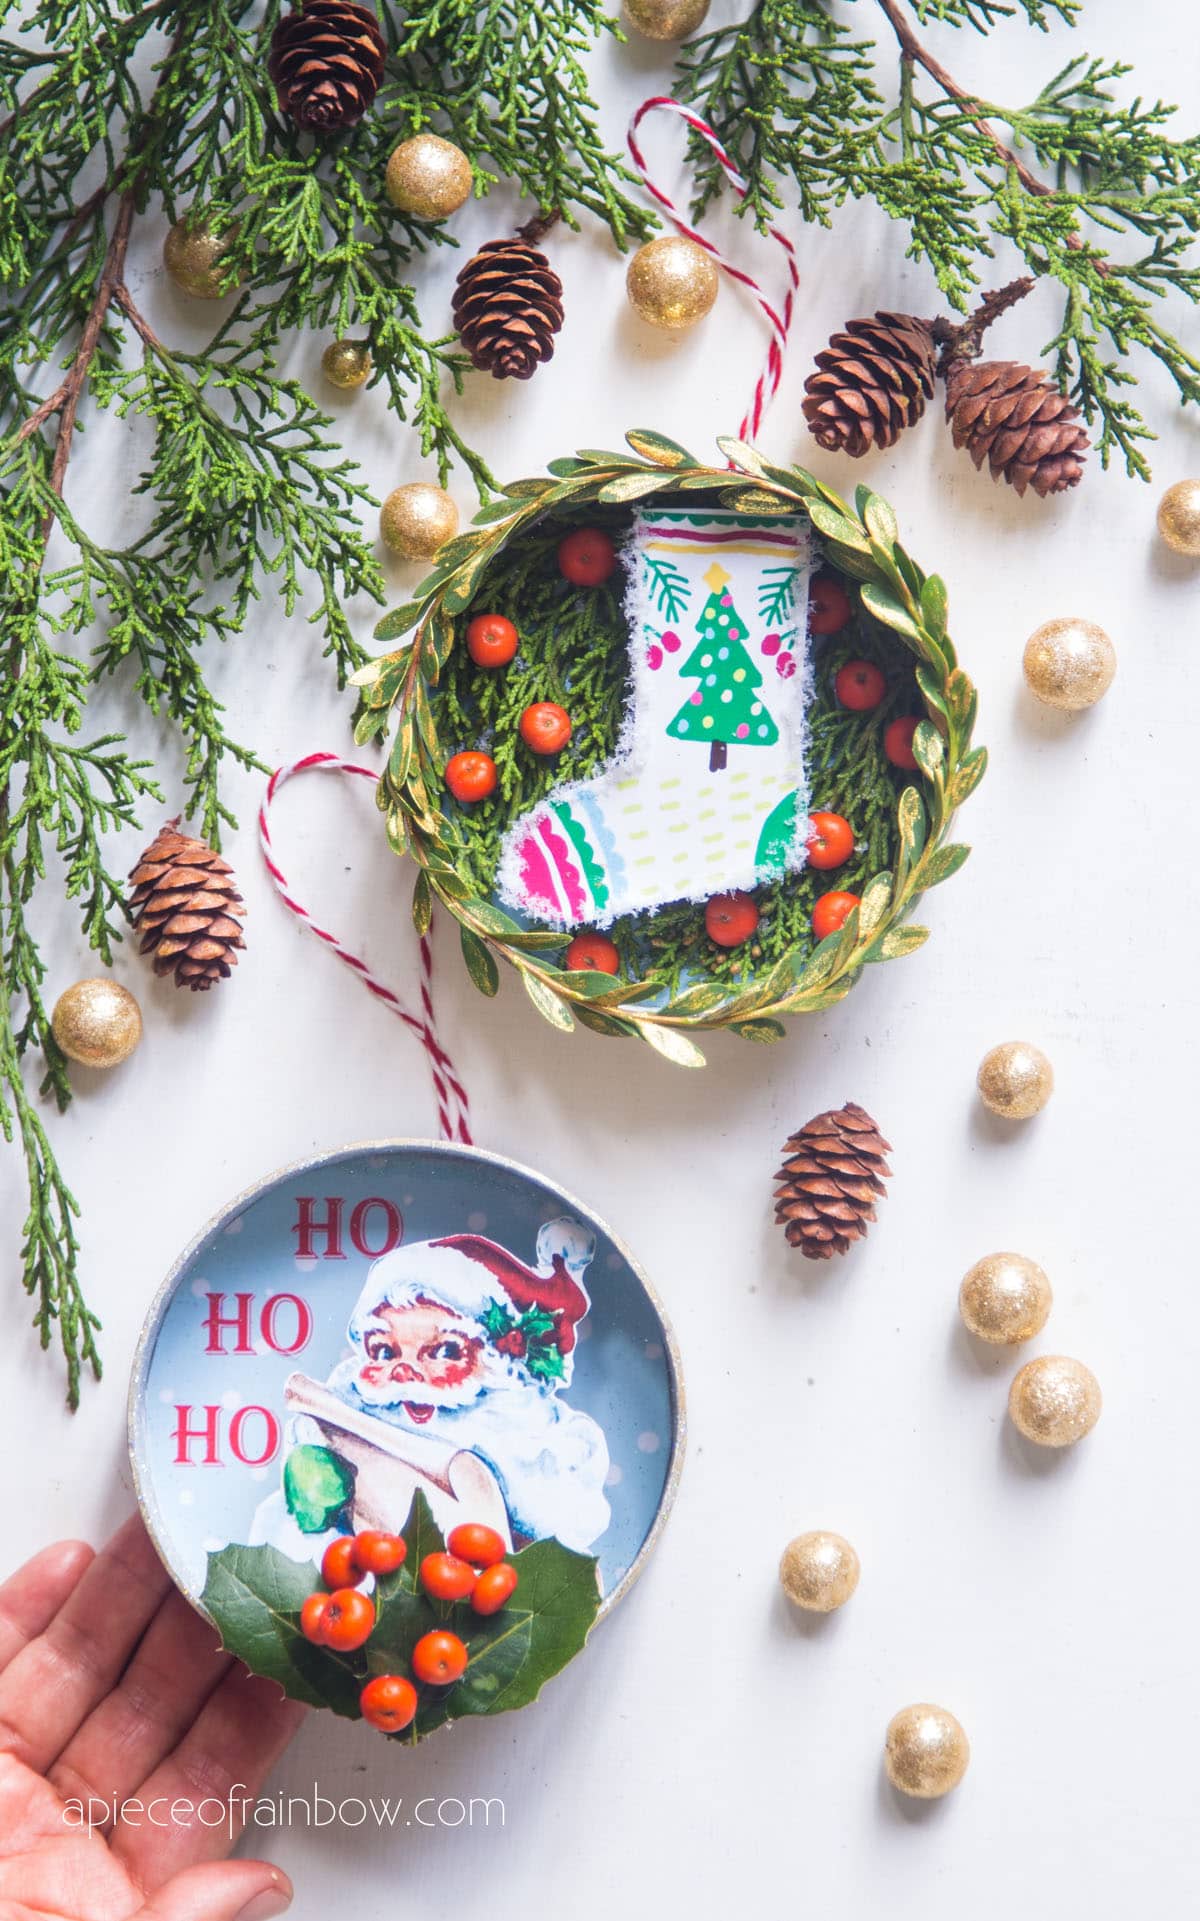 Anthropologie vintage DIY Christmas ornaments with Santa and stocking, easy crafts and decorations made from paper and recycled cans